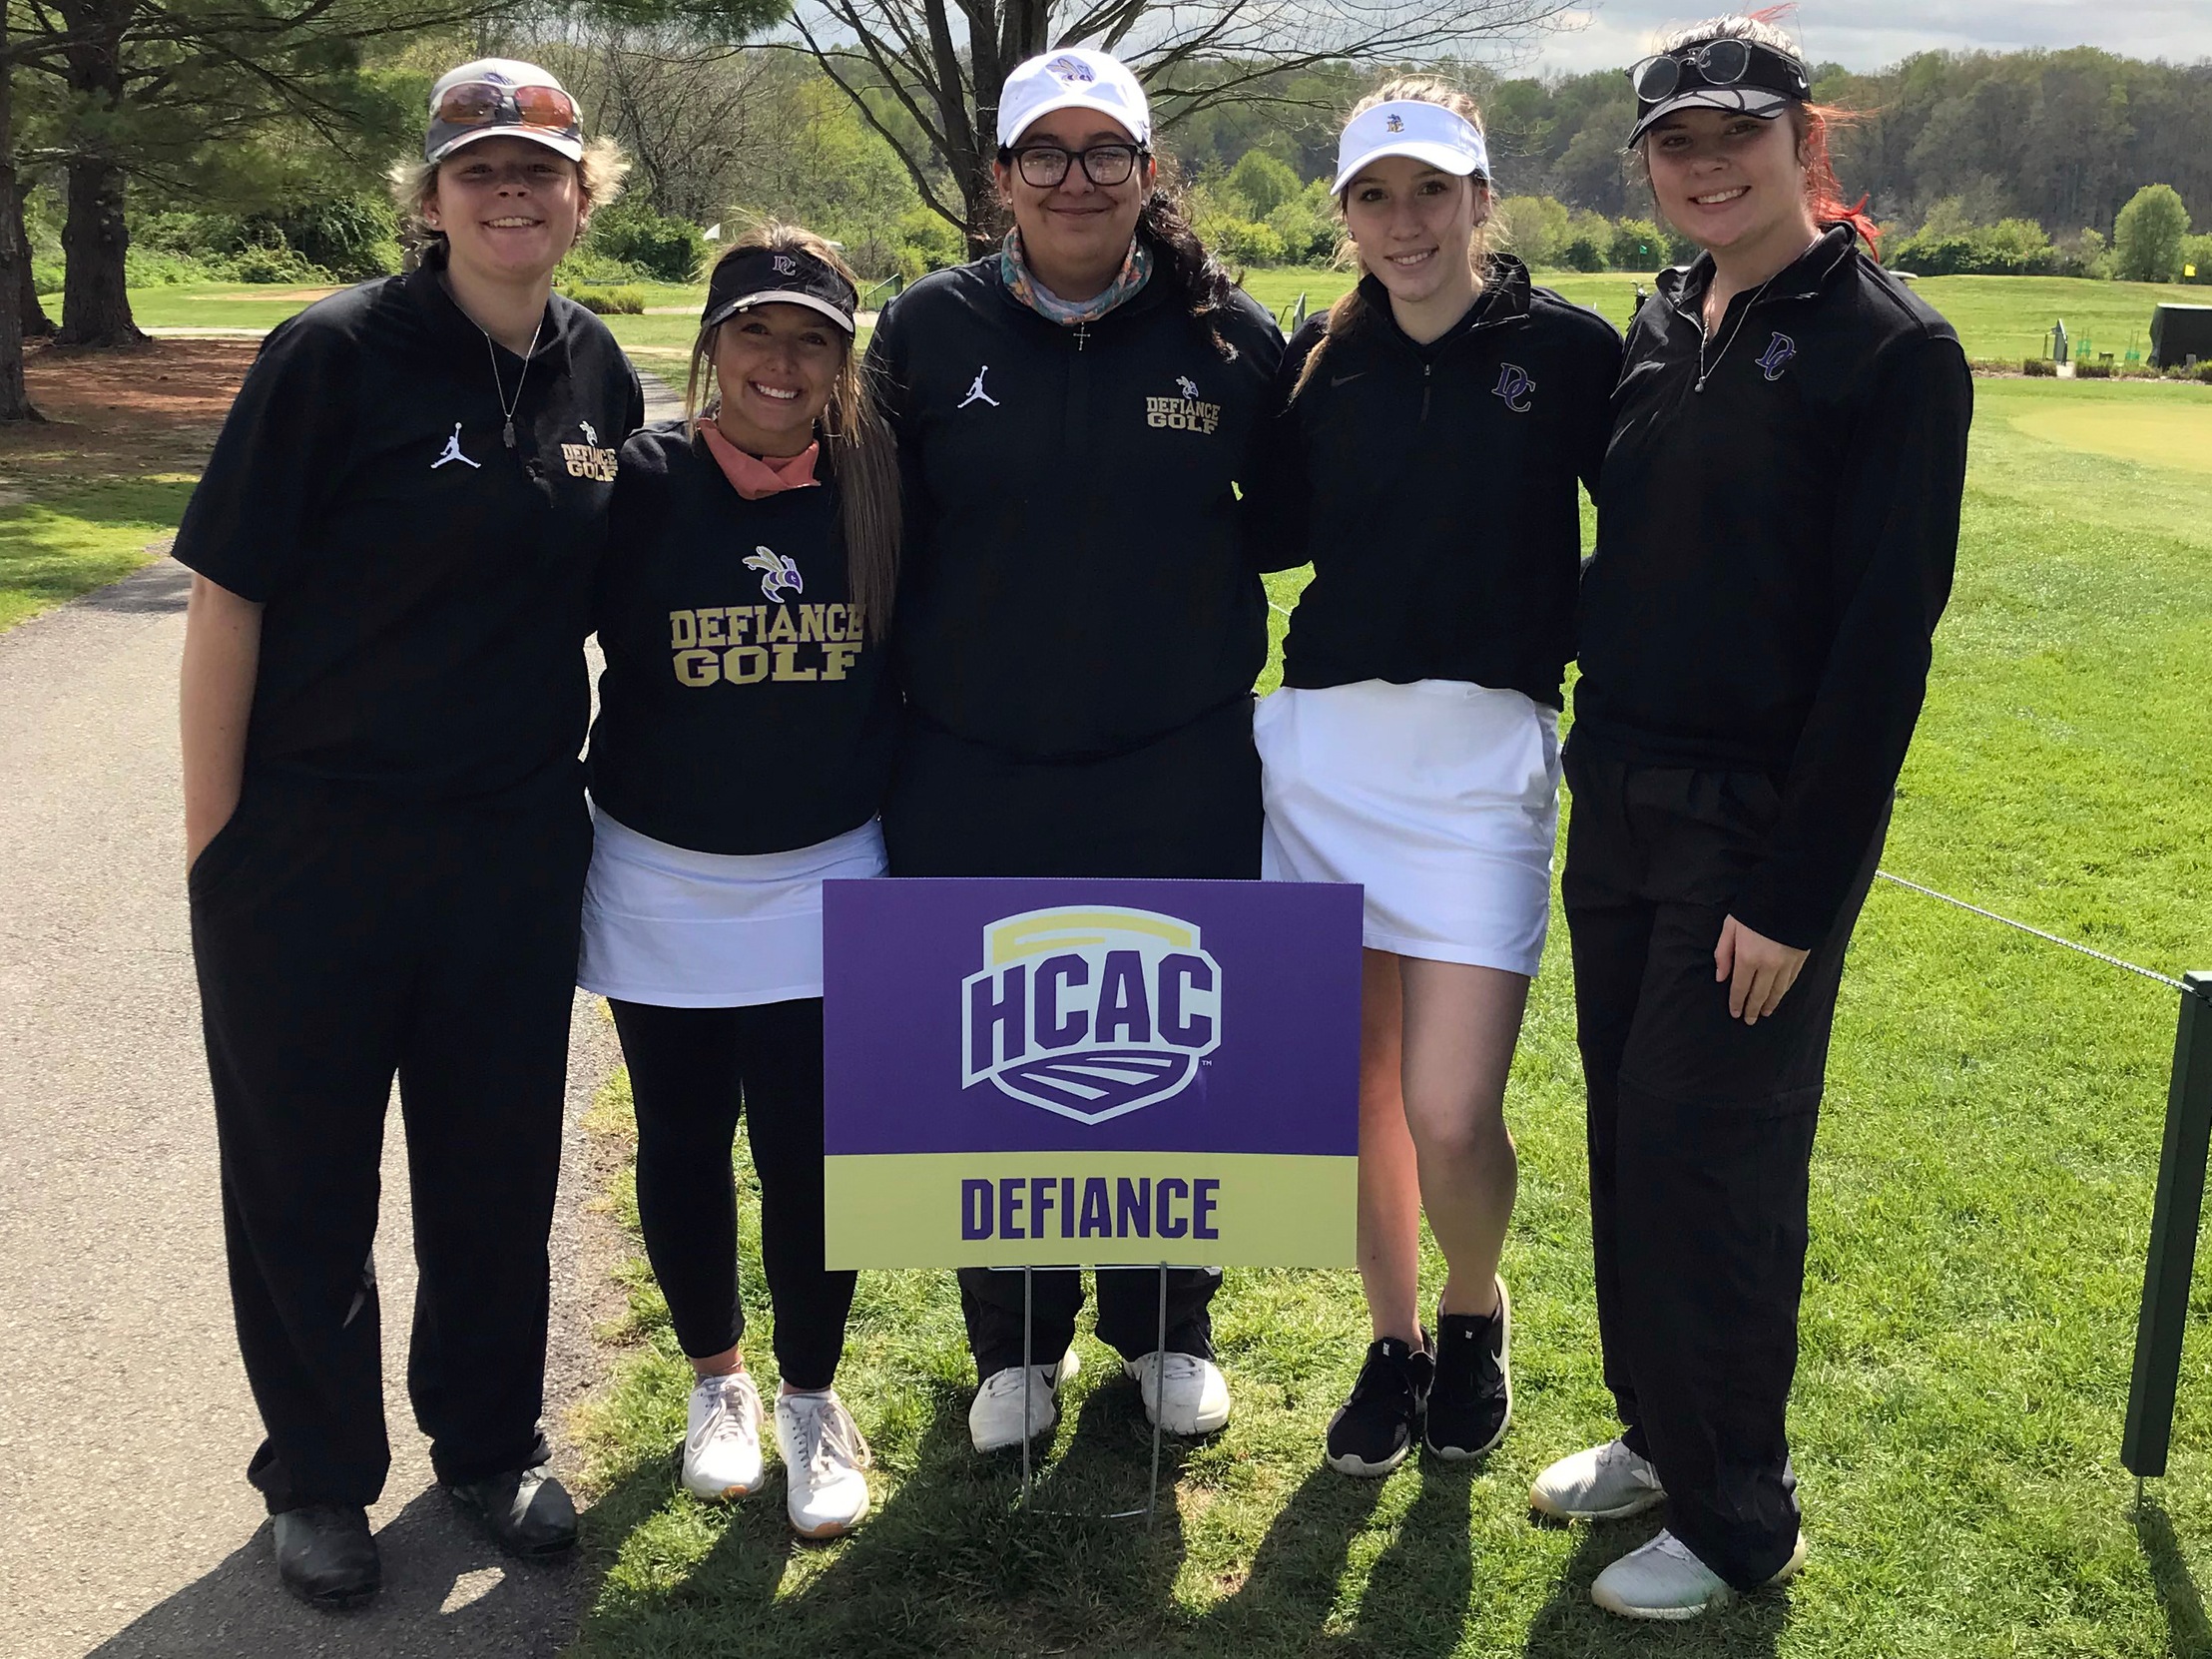 Women’s golf starts play at HCAC Championship in Harrison